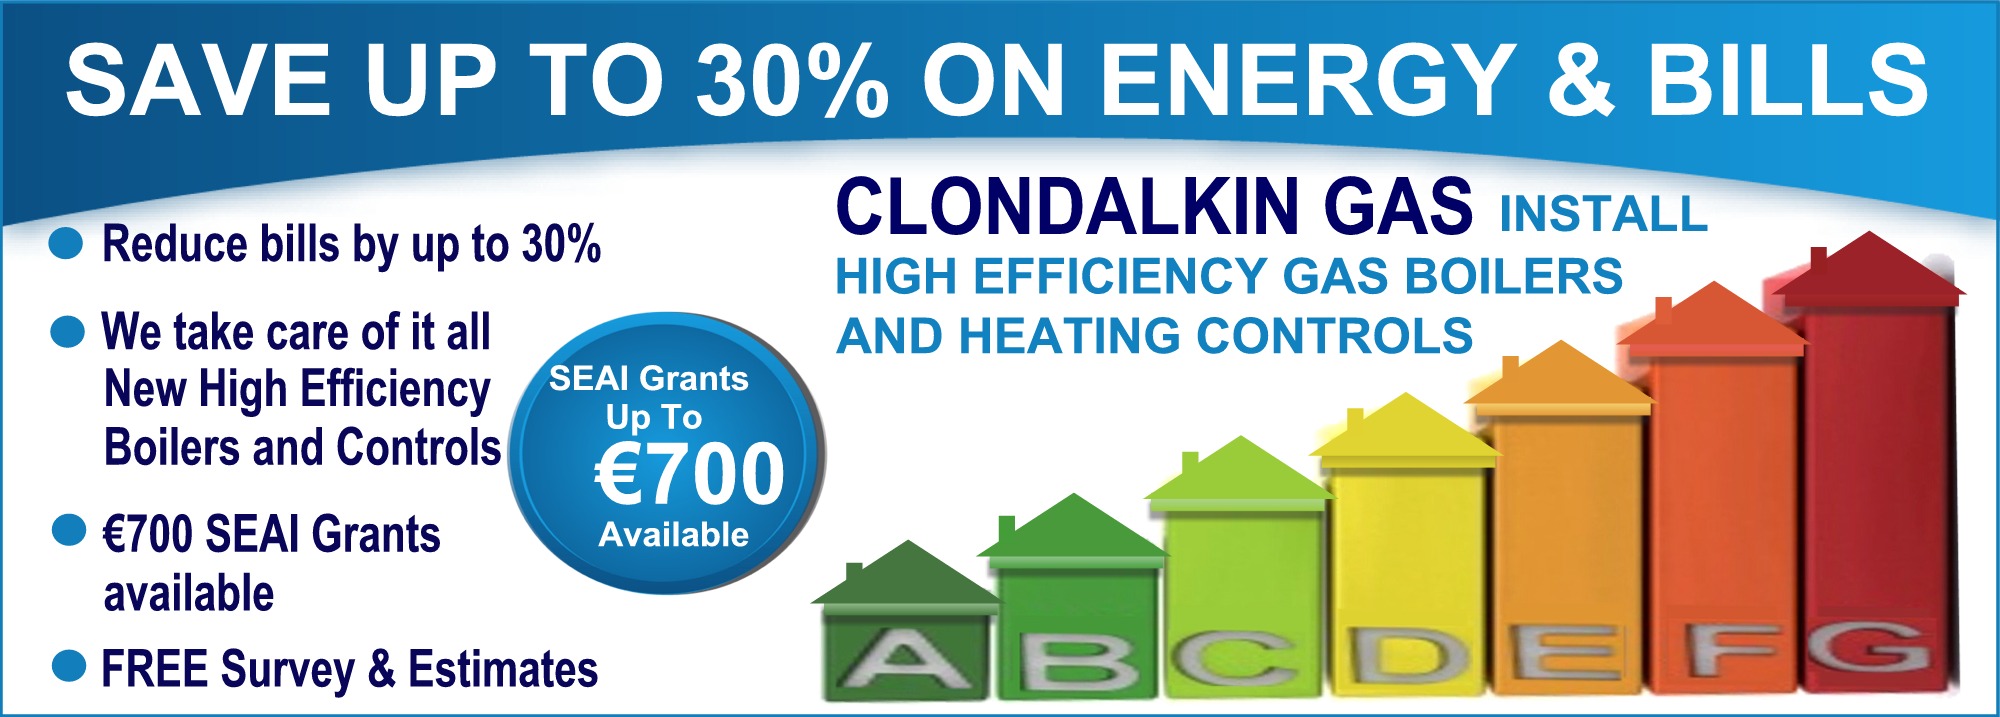 Save up to 30% on energy & bills - Clondalkin Gas install High Efficiency Gas Boilers and Heating Controls. We take care of it all, €700 SEAI grants available, free survey & estimates